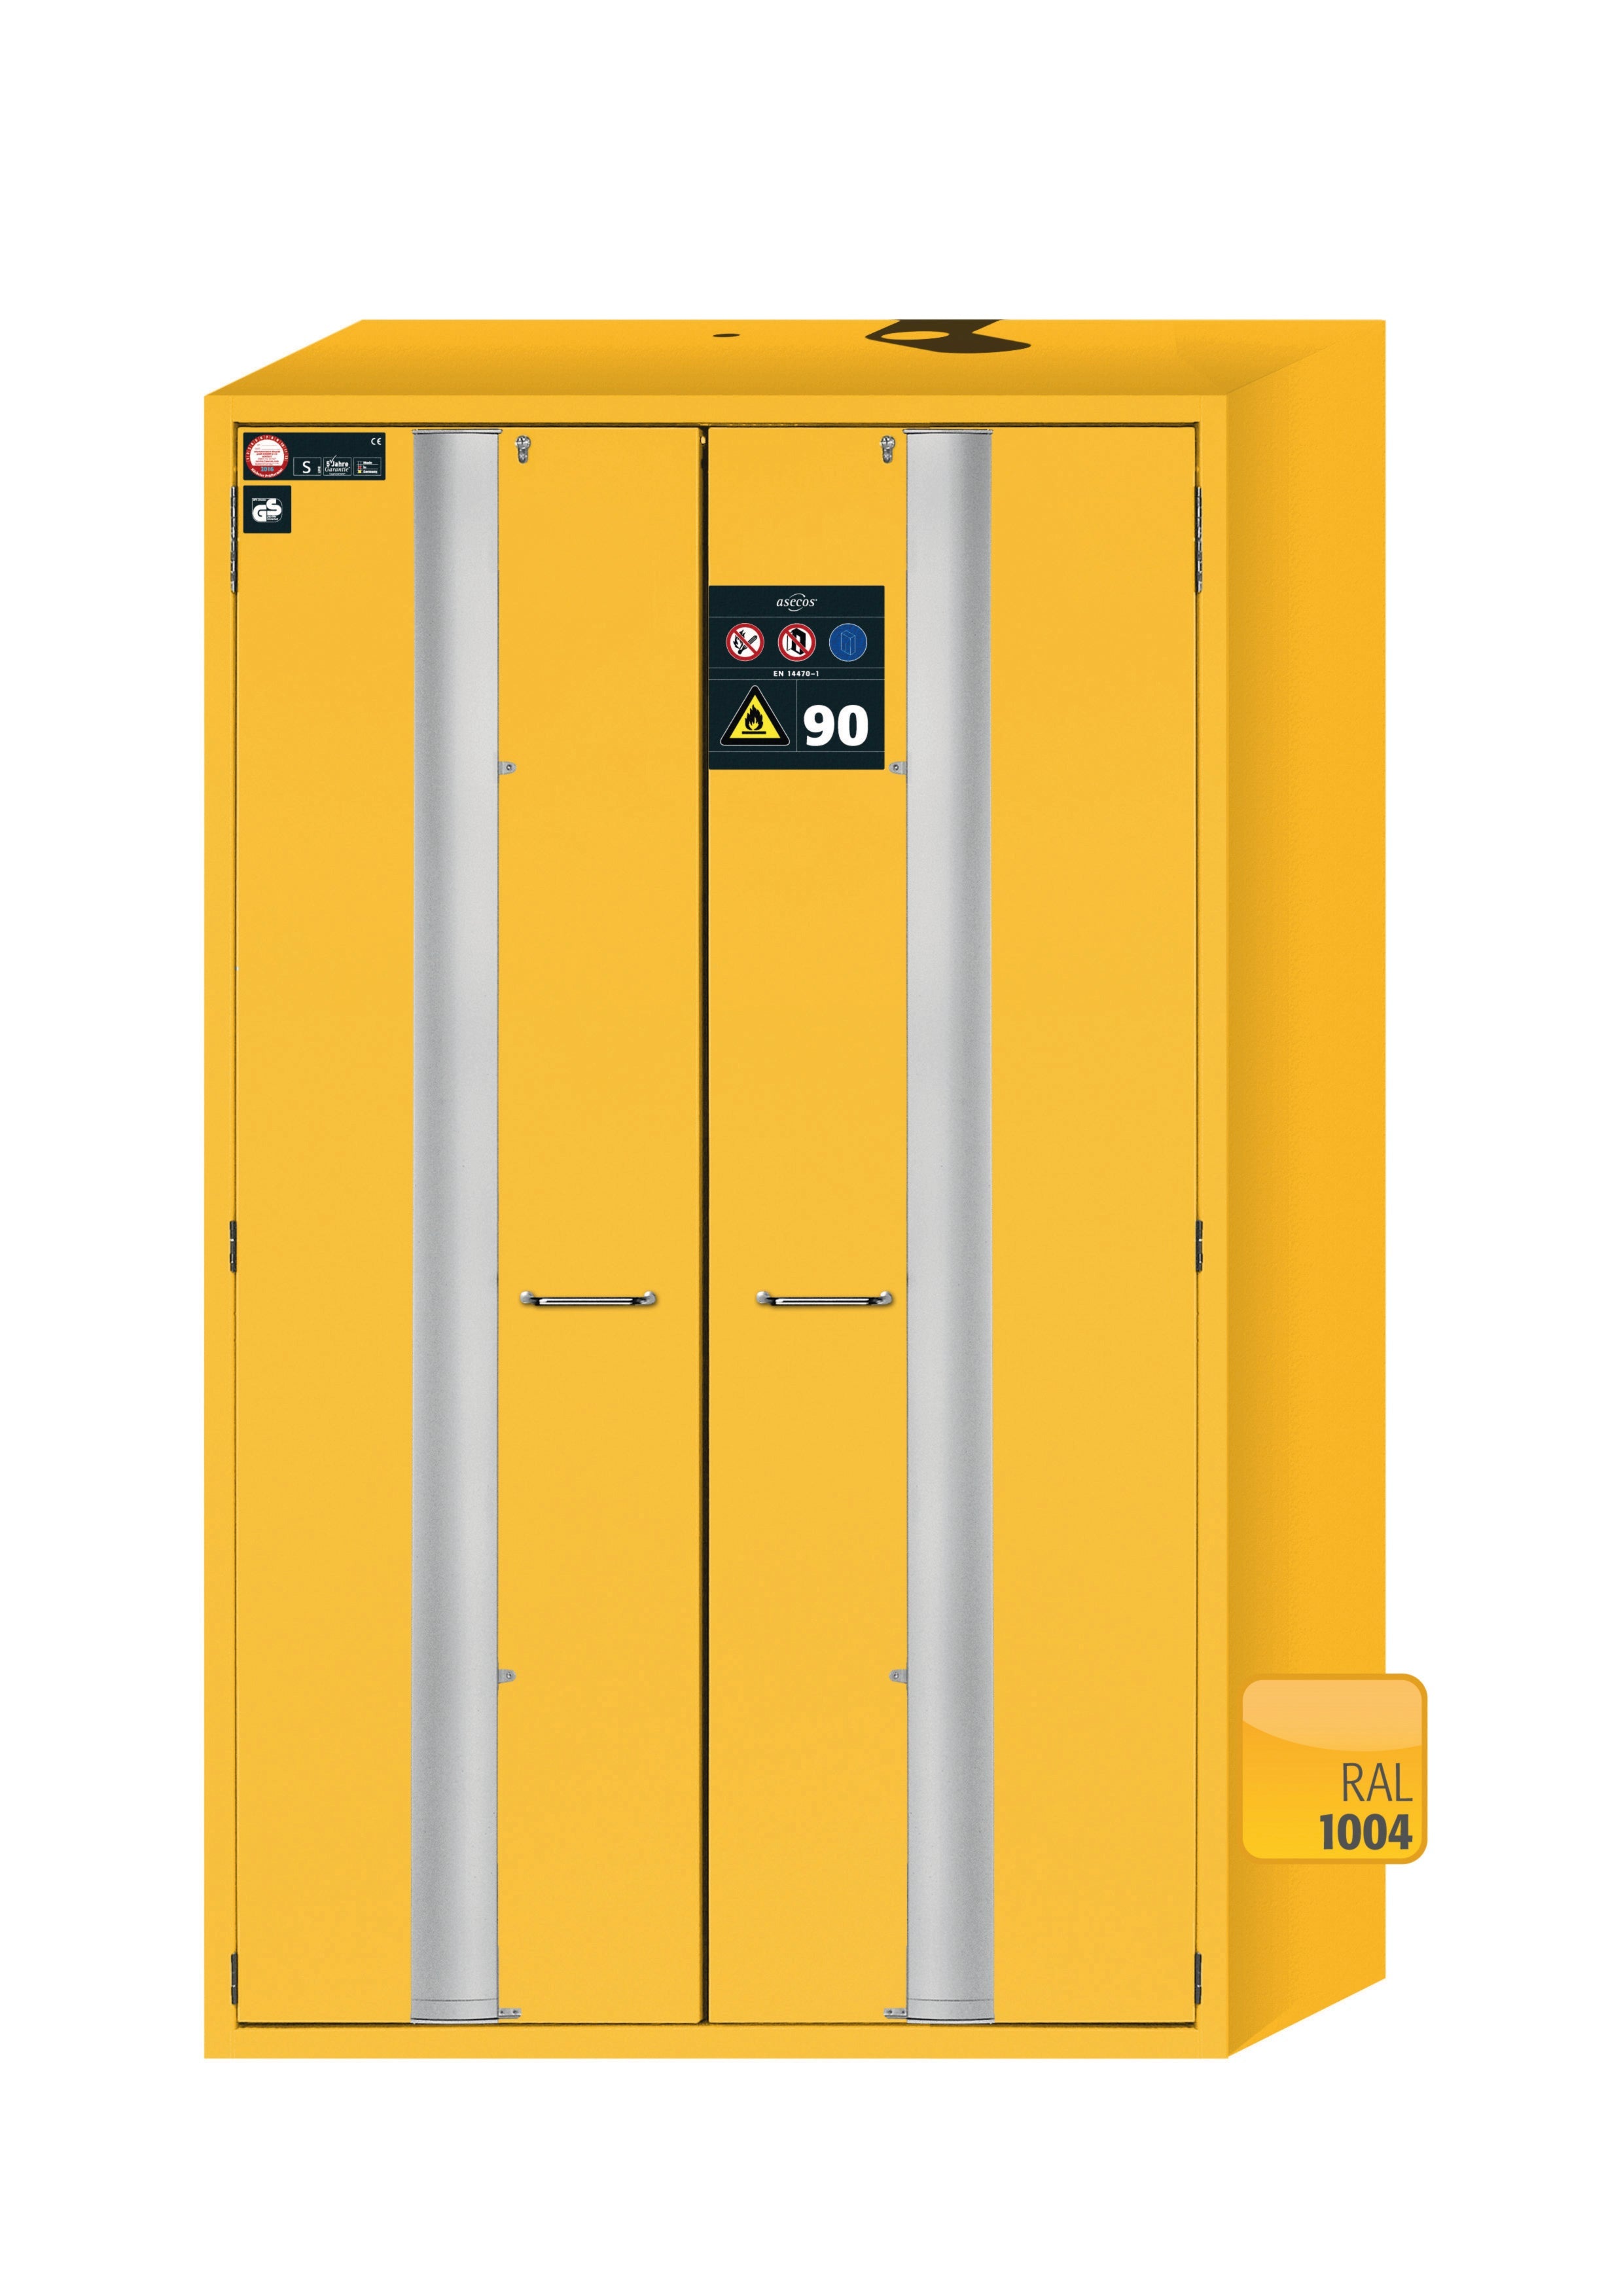 Type 90 safety storage cabinet S-PHOENIX-90 model S90.196.120.FDAS in warning yellow RAL 1004 with 2x shelf standard (stainless steel 1.4301),